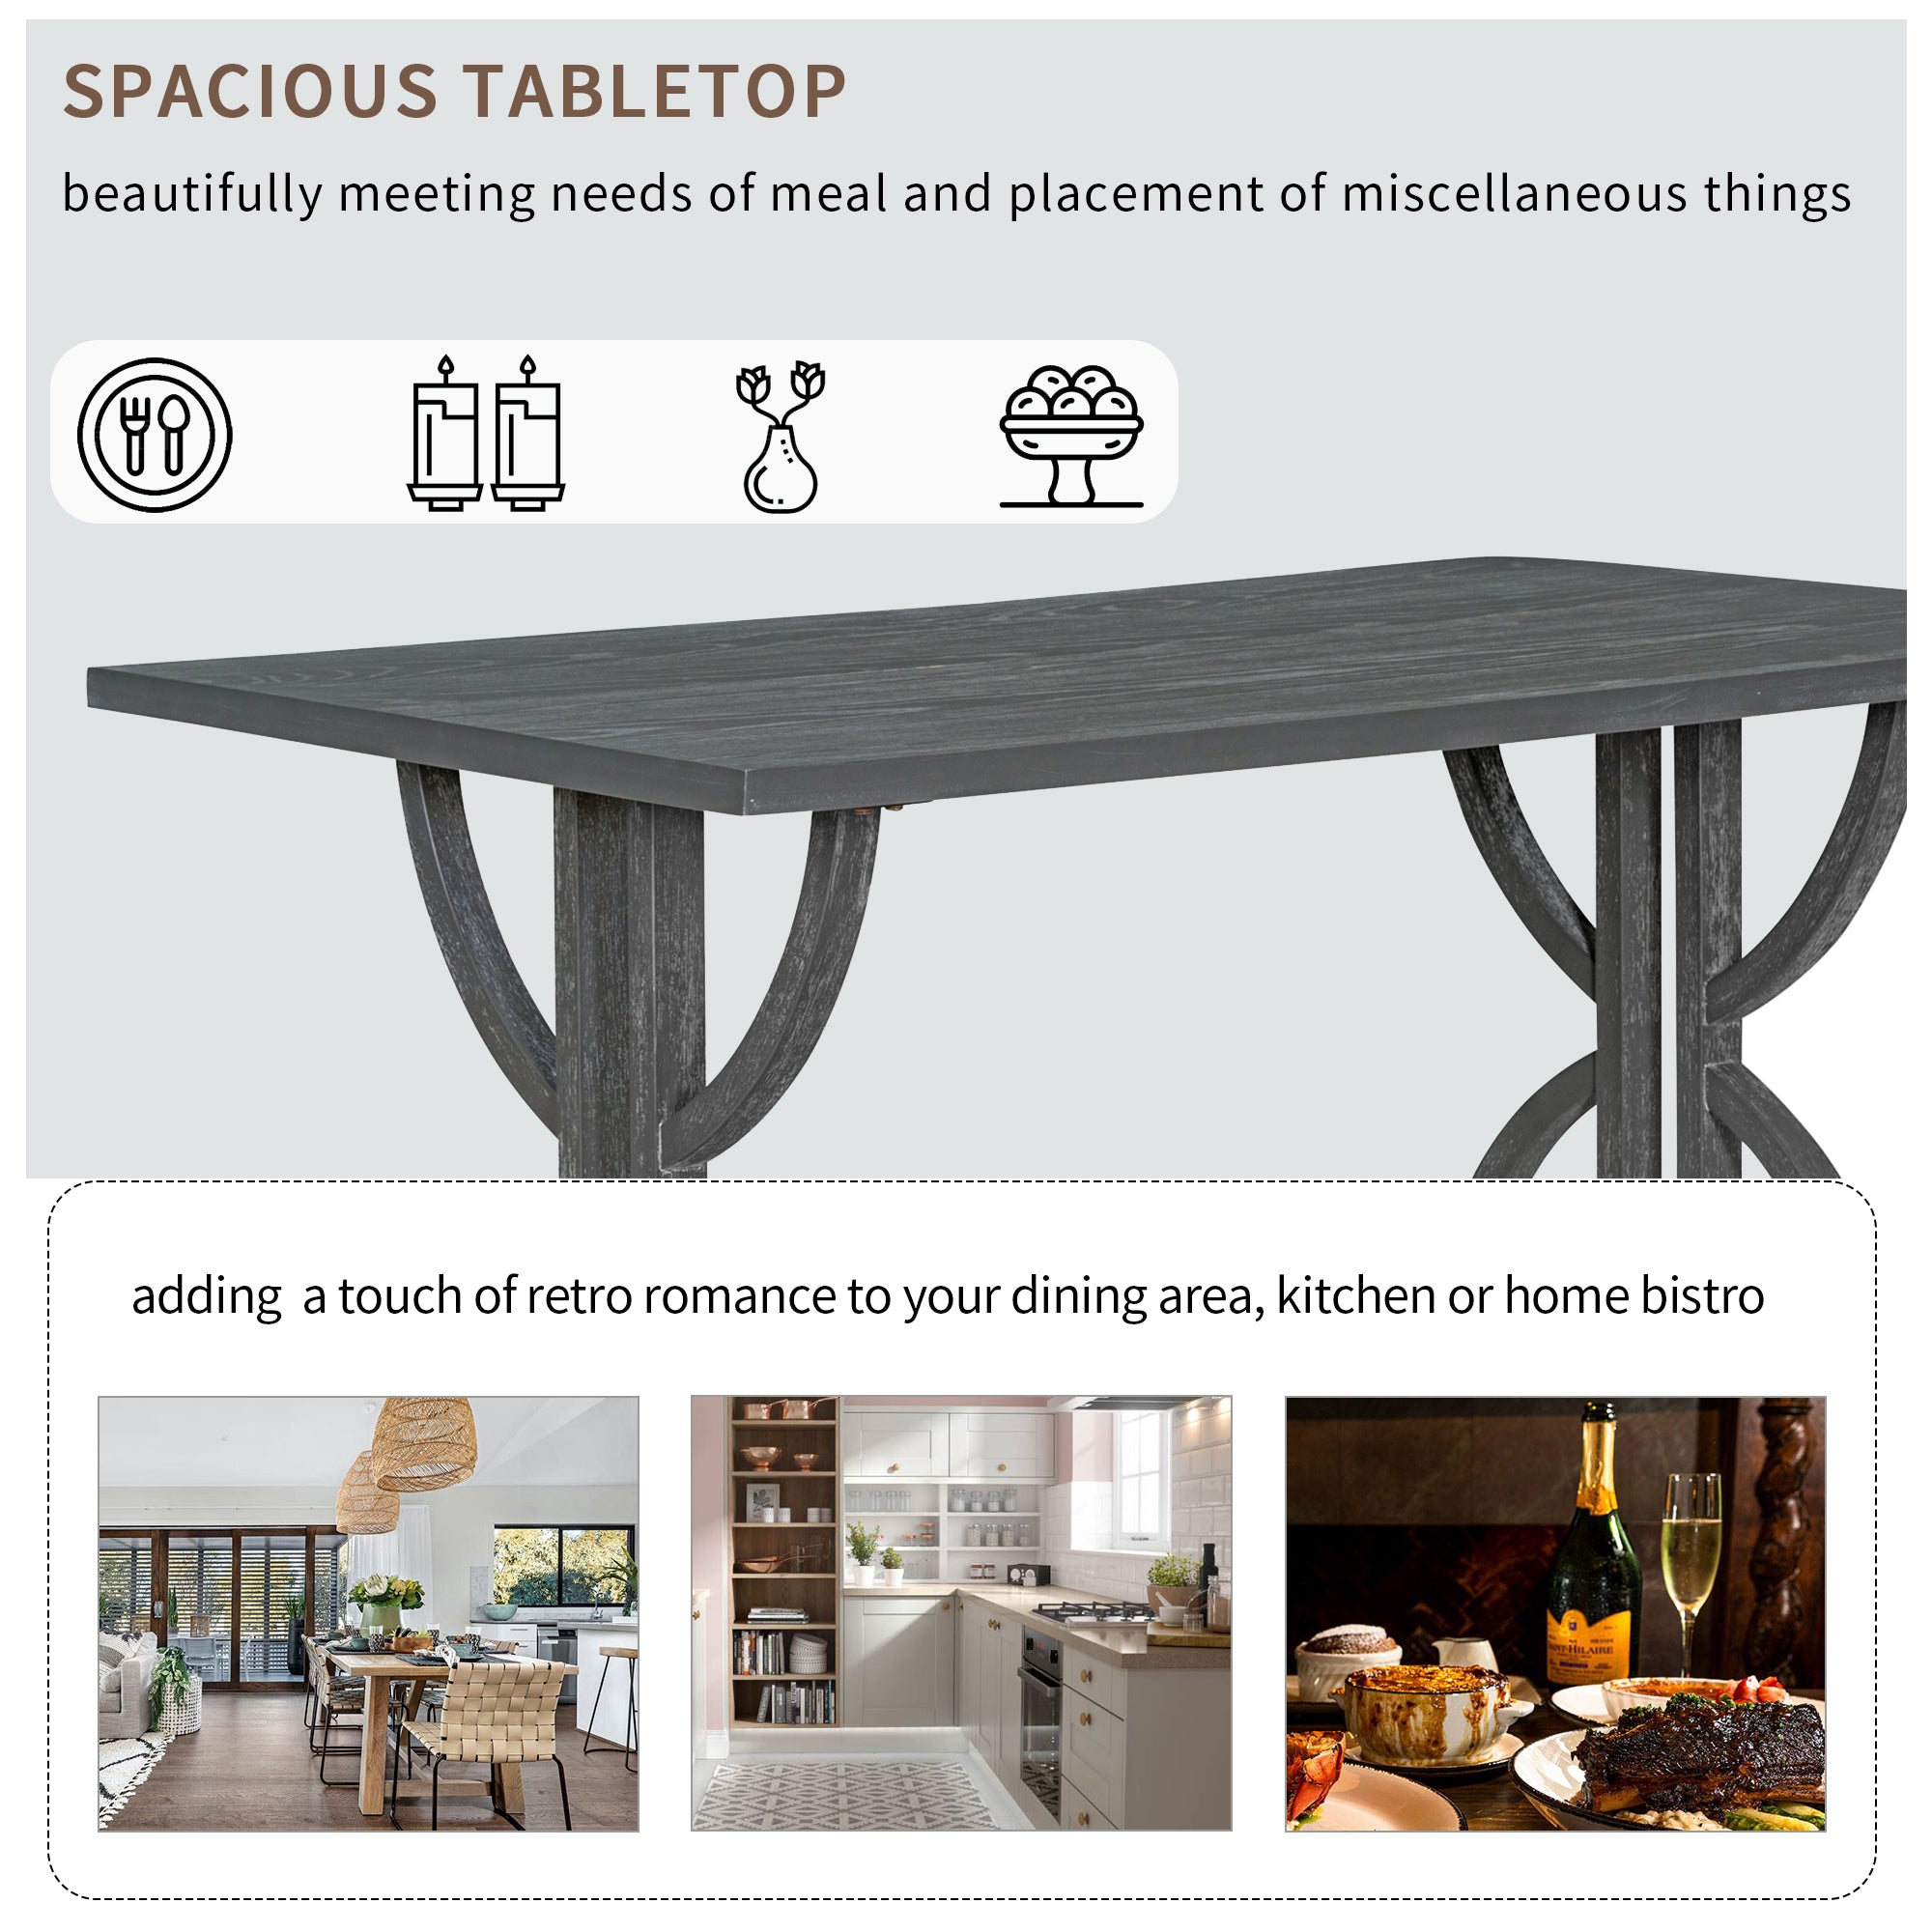 6-Piece Retro Rectangular Dining Table Set, Table with Unique Legs and 4 Upholstered Chairs & 1 Bench - Grey Wash